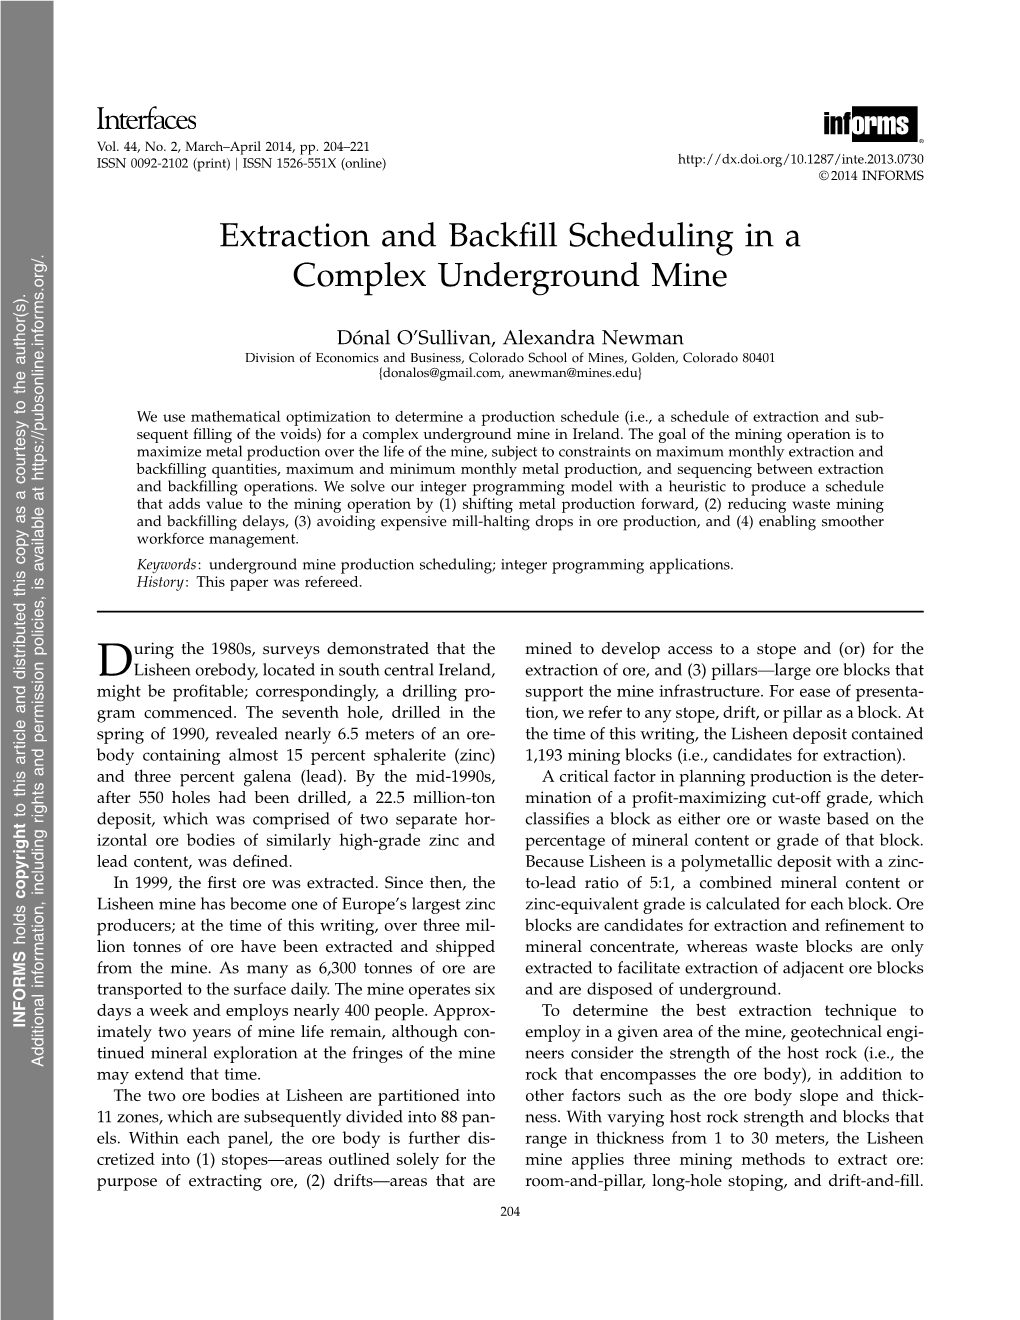 Extraction and Backfill Scheduling in a Complex Underground Mine